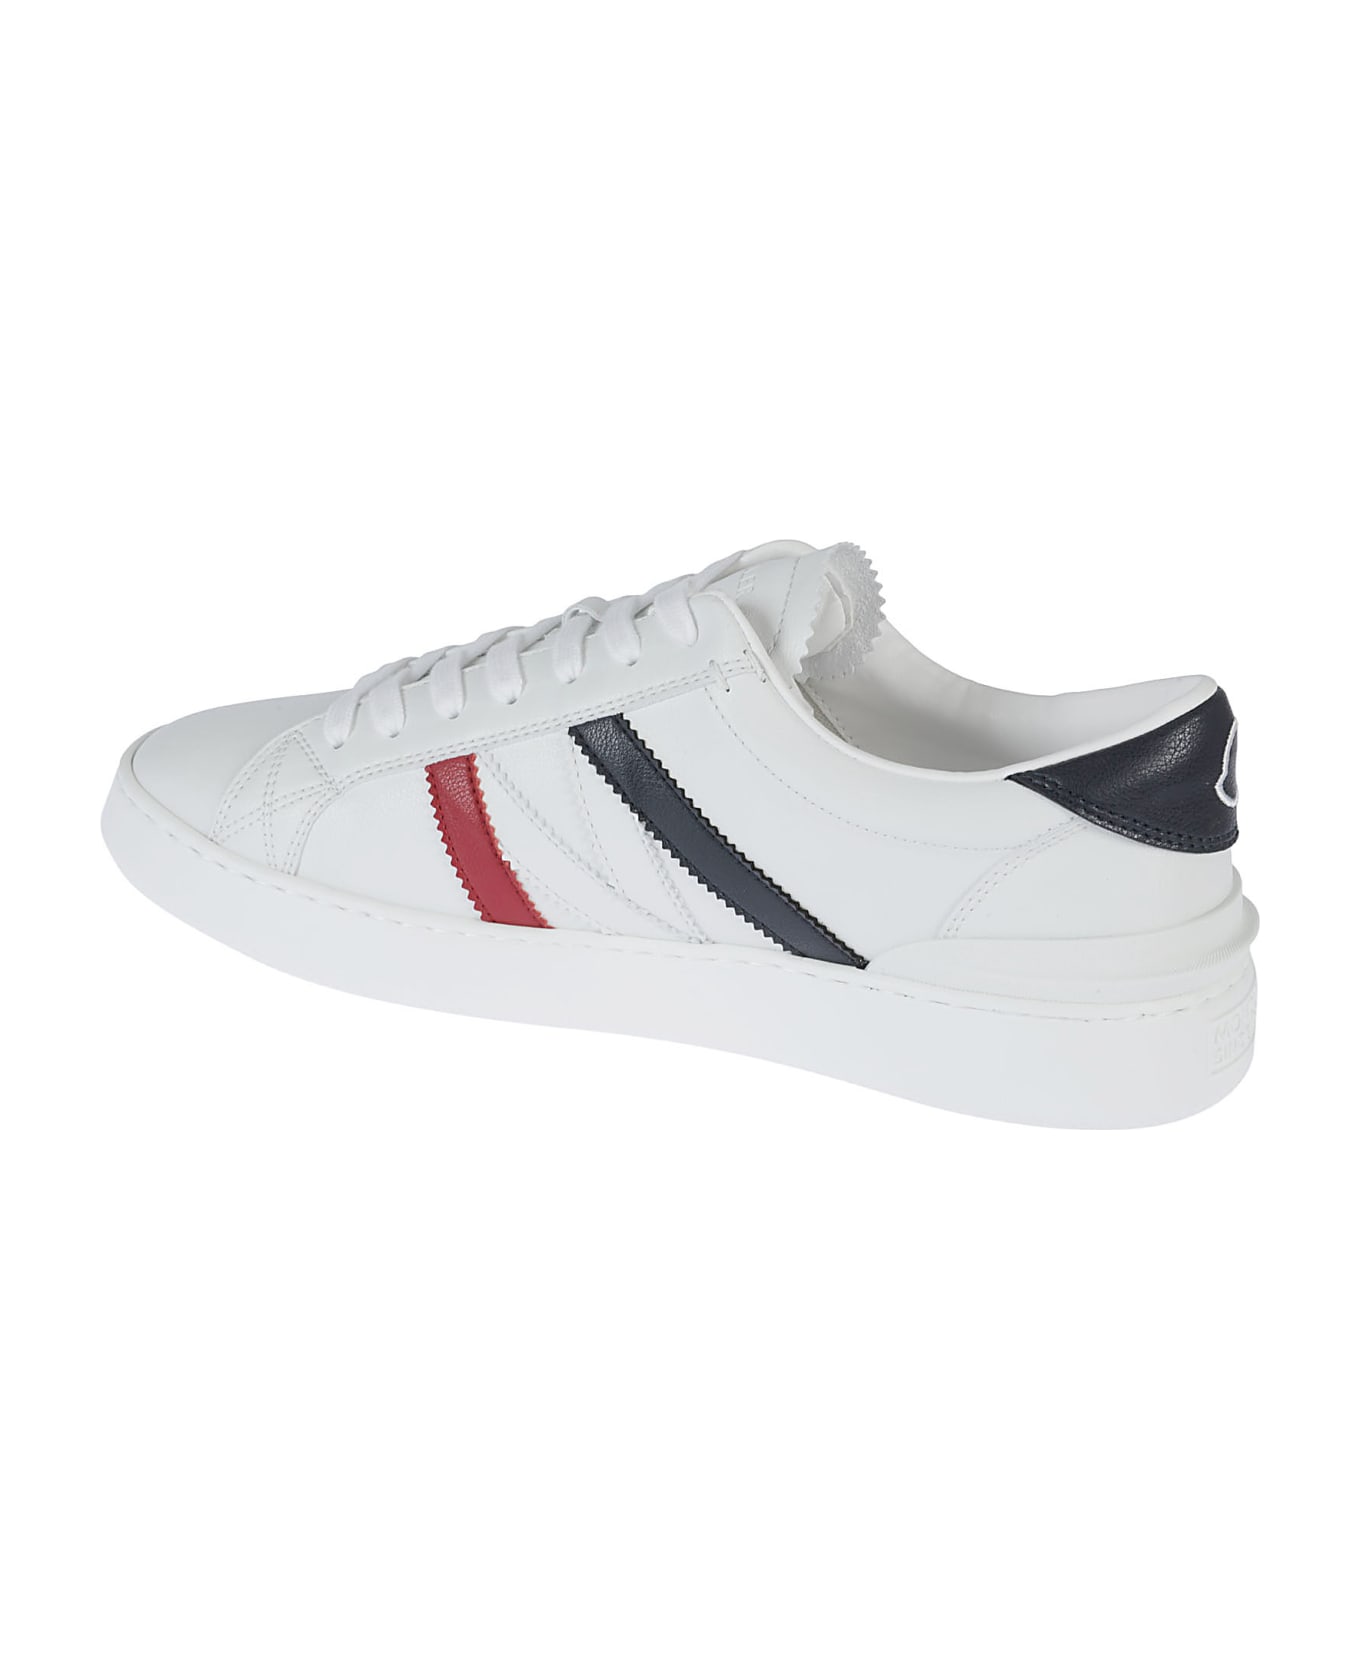 Moncler Logo Printed Lace-up Sneakers - WHITE/BLUE/RED